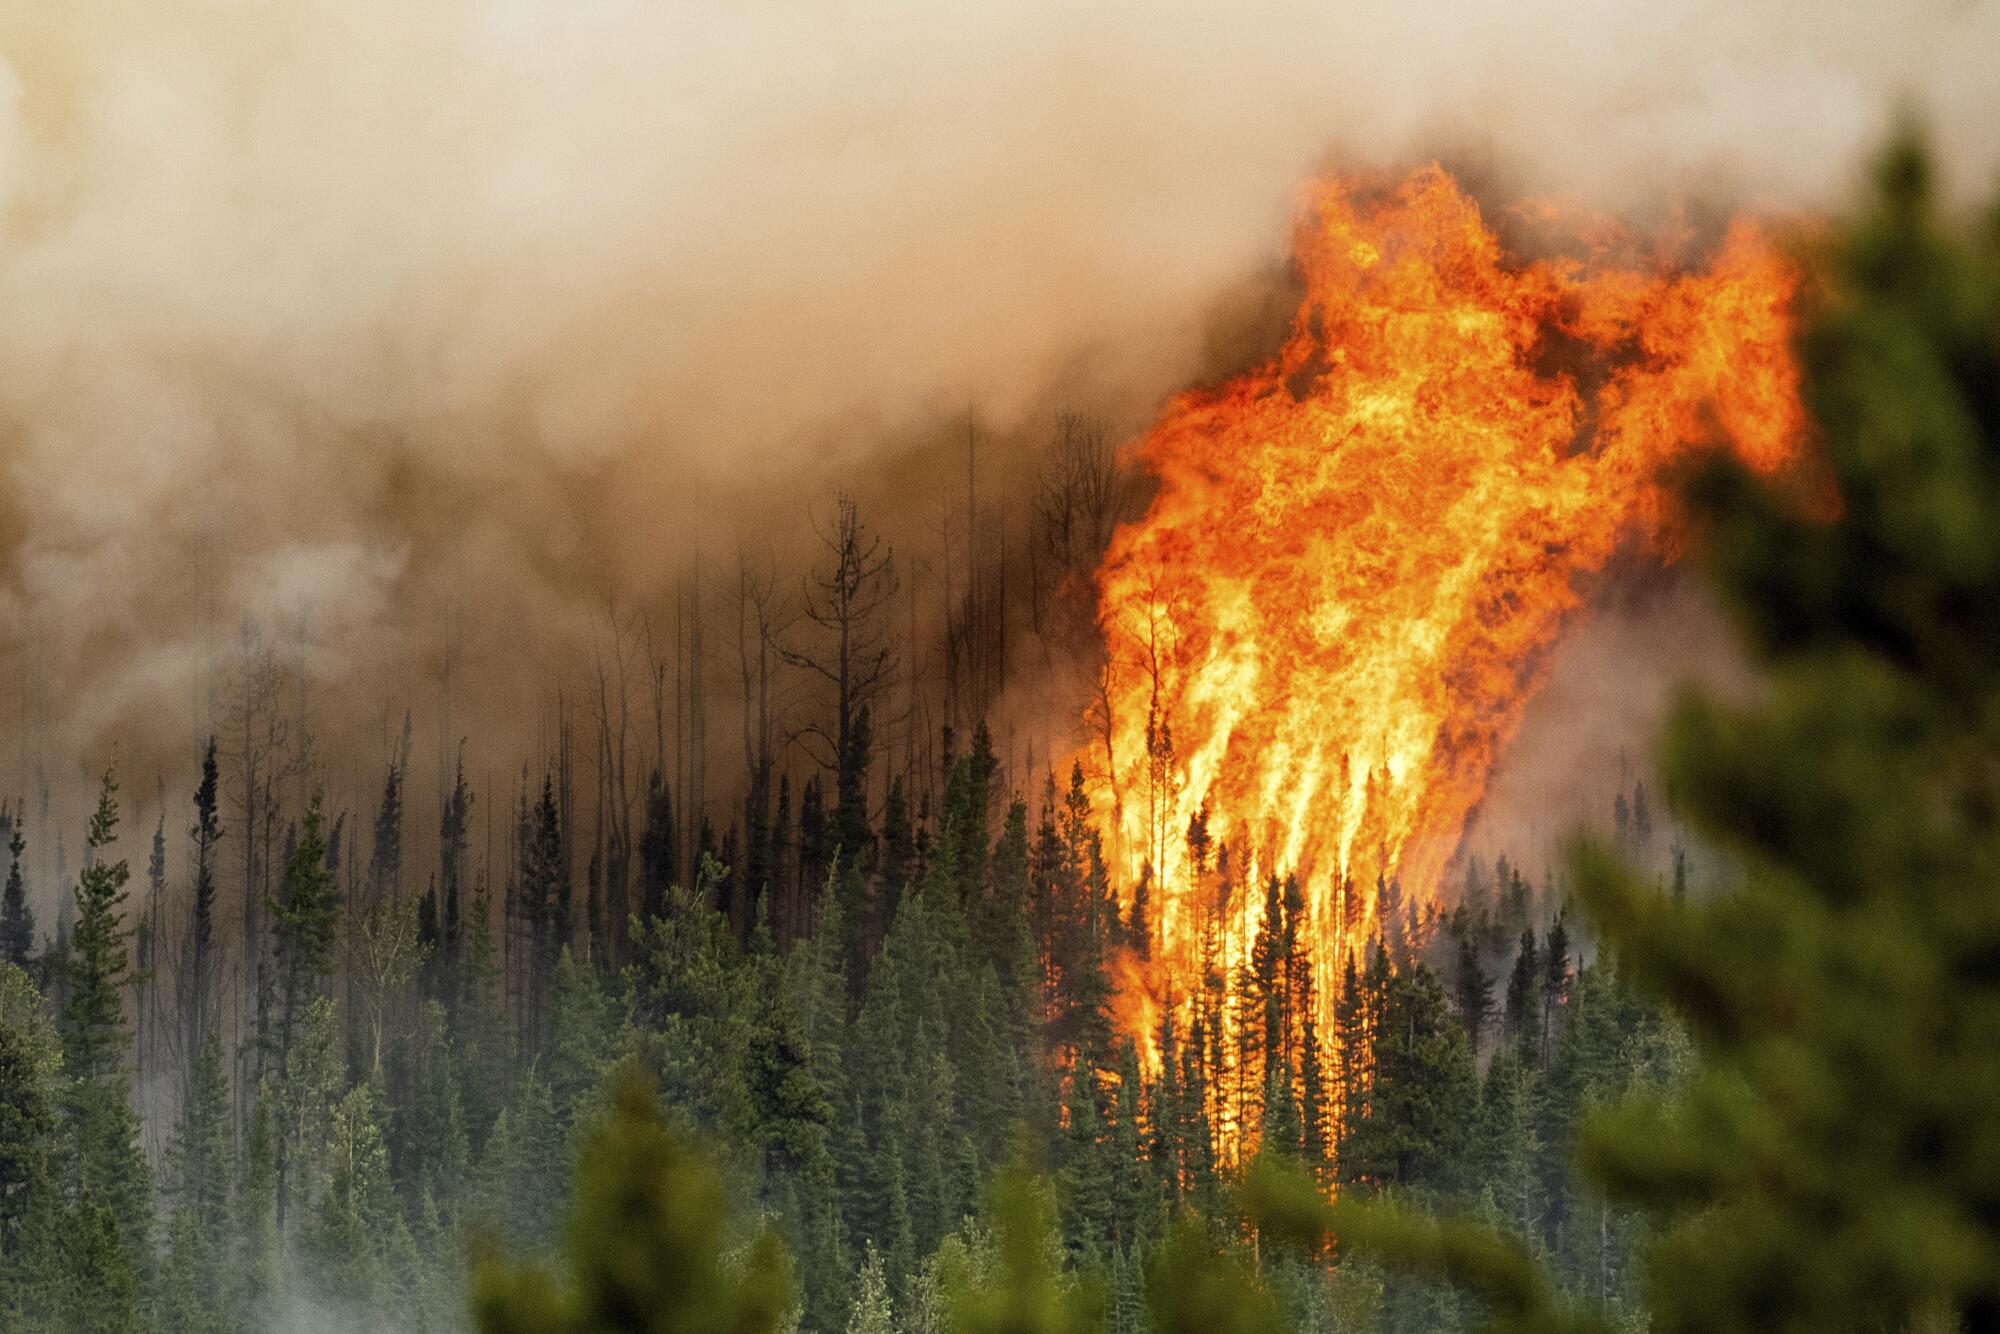 Flames reach high above a forest as smoke covers the sky.